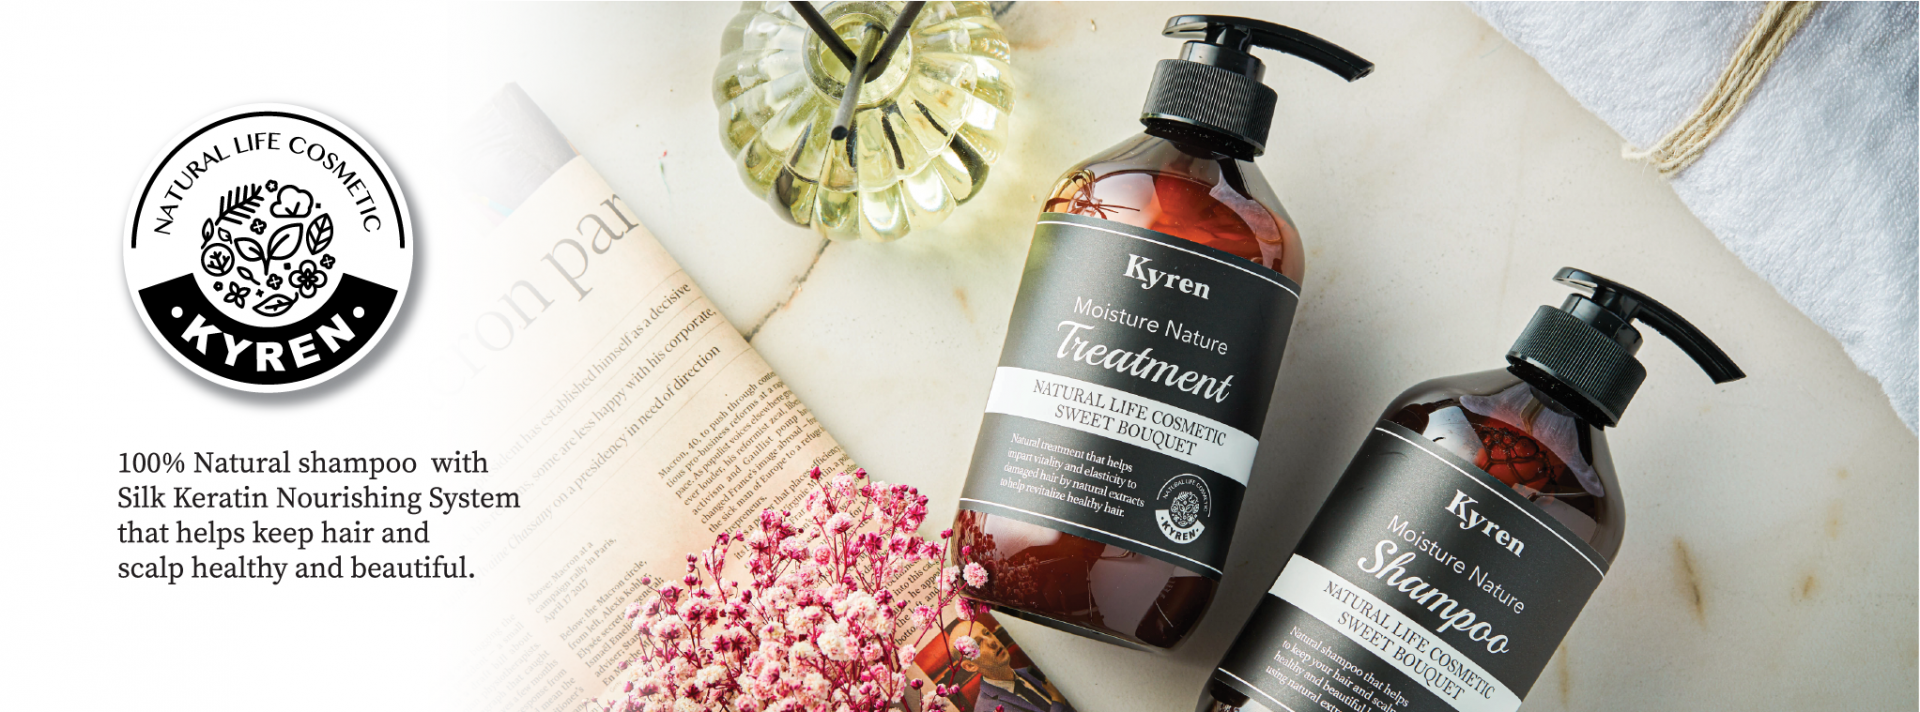 KYREN 100% Natural shampoo with Silk Keratin Nourishing System that helps keep hair and scalp heallthy and beautiful